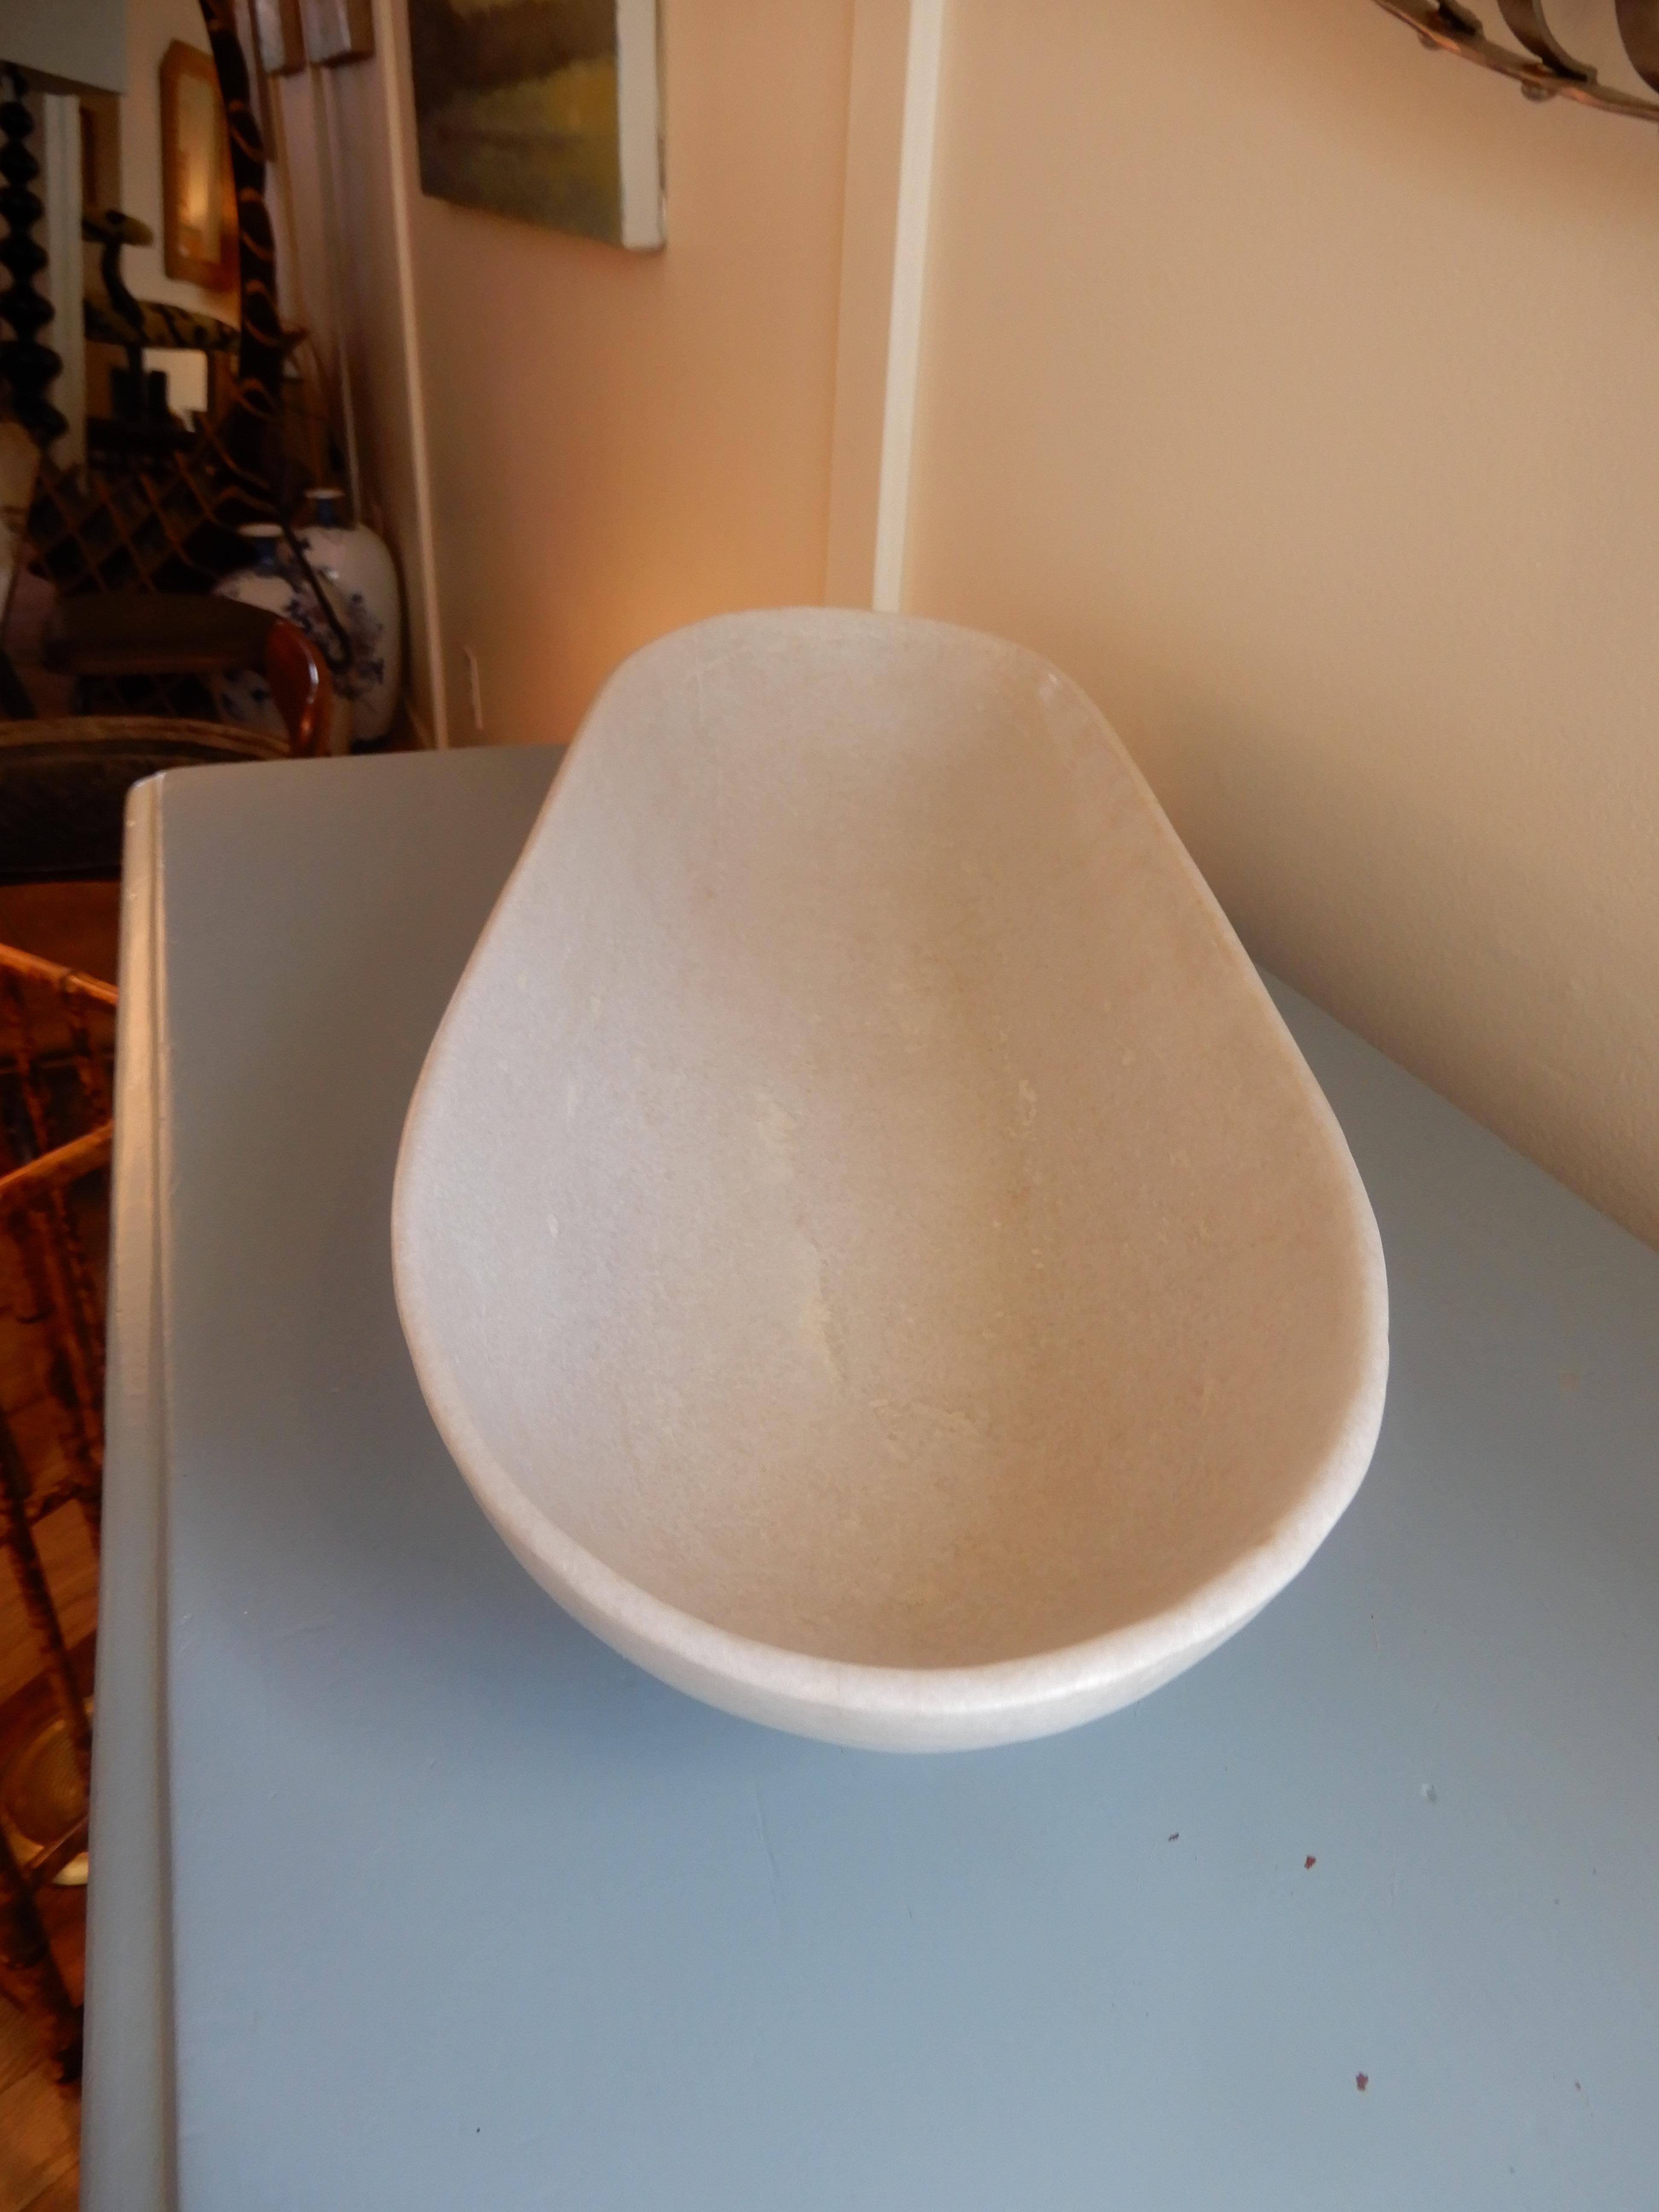 A studio crafted large ovate white alabaster bowl, perfectly crafted and polished, good center piece, and food safe.